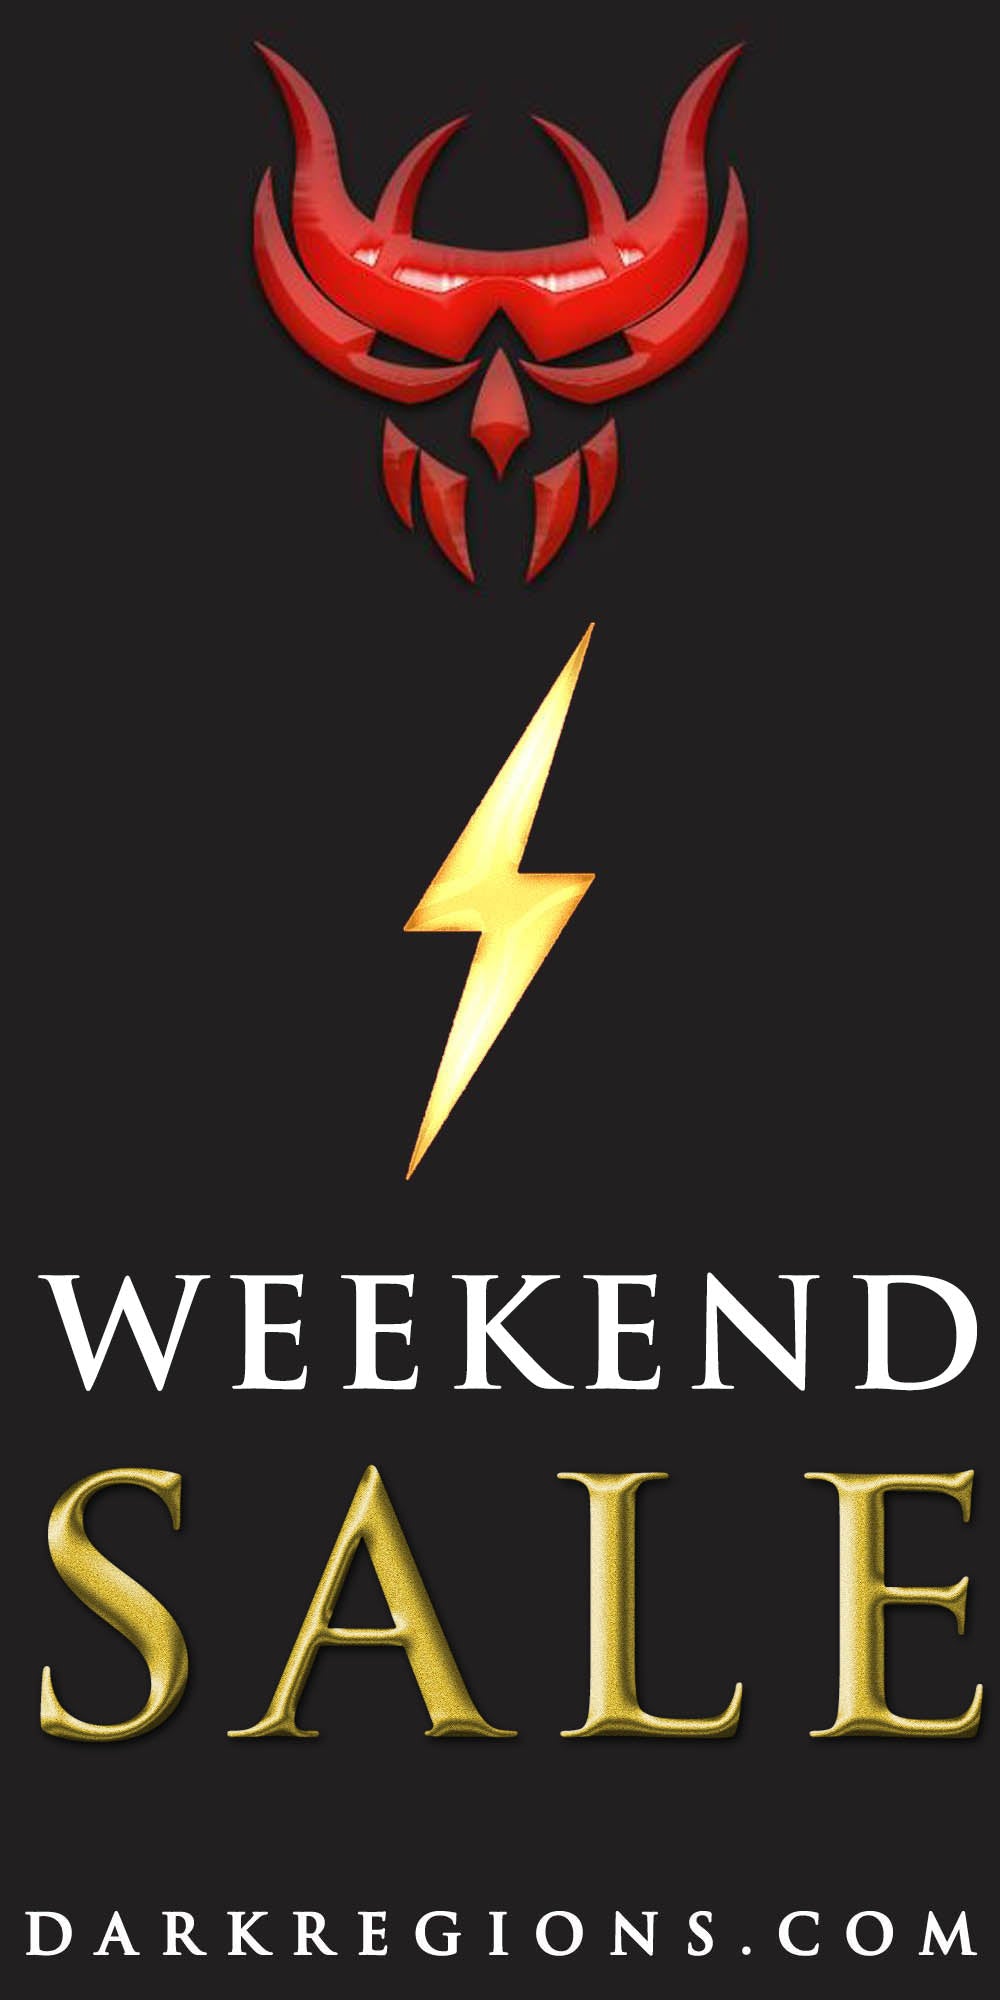 WEEKEND SALE Happening Today May 28th to May 31st 2021 Only on DarkRegions.com